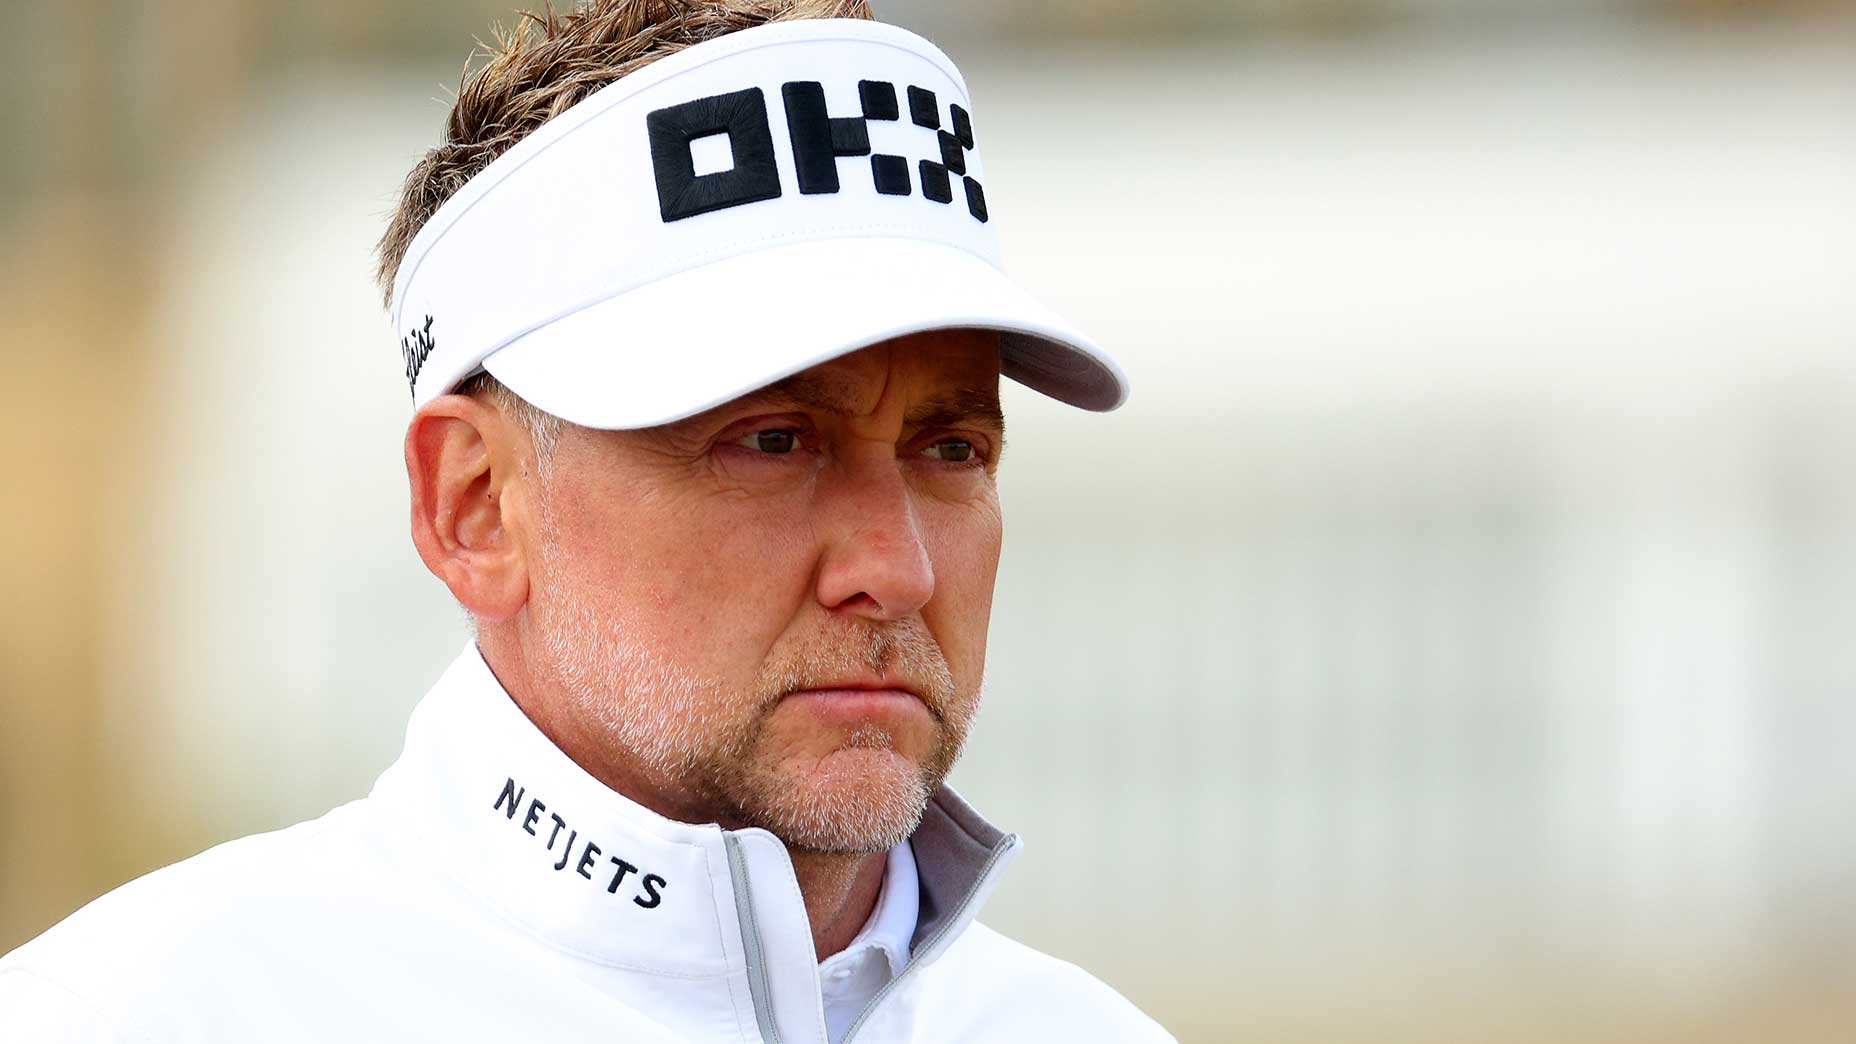 Ian Poulter watches the Open Championship on Thursday